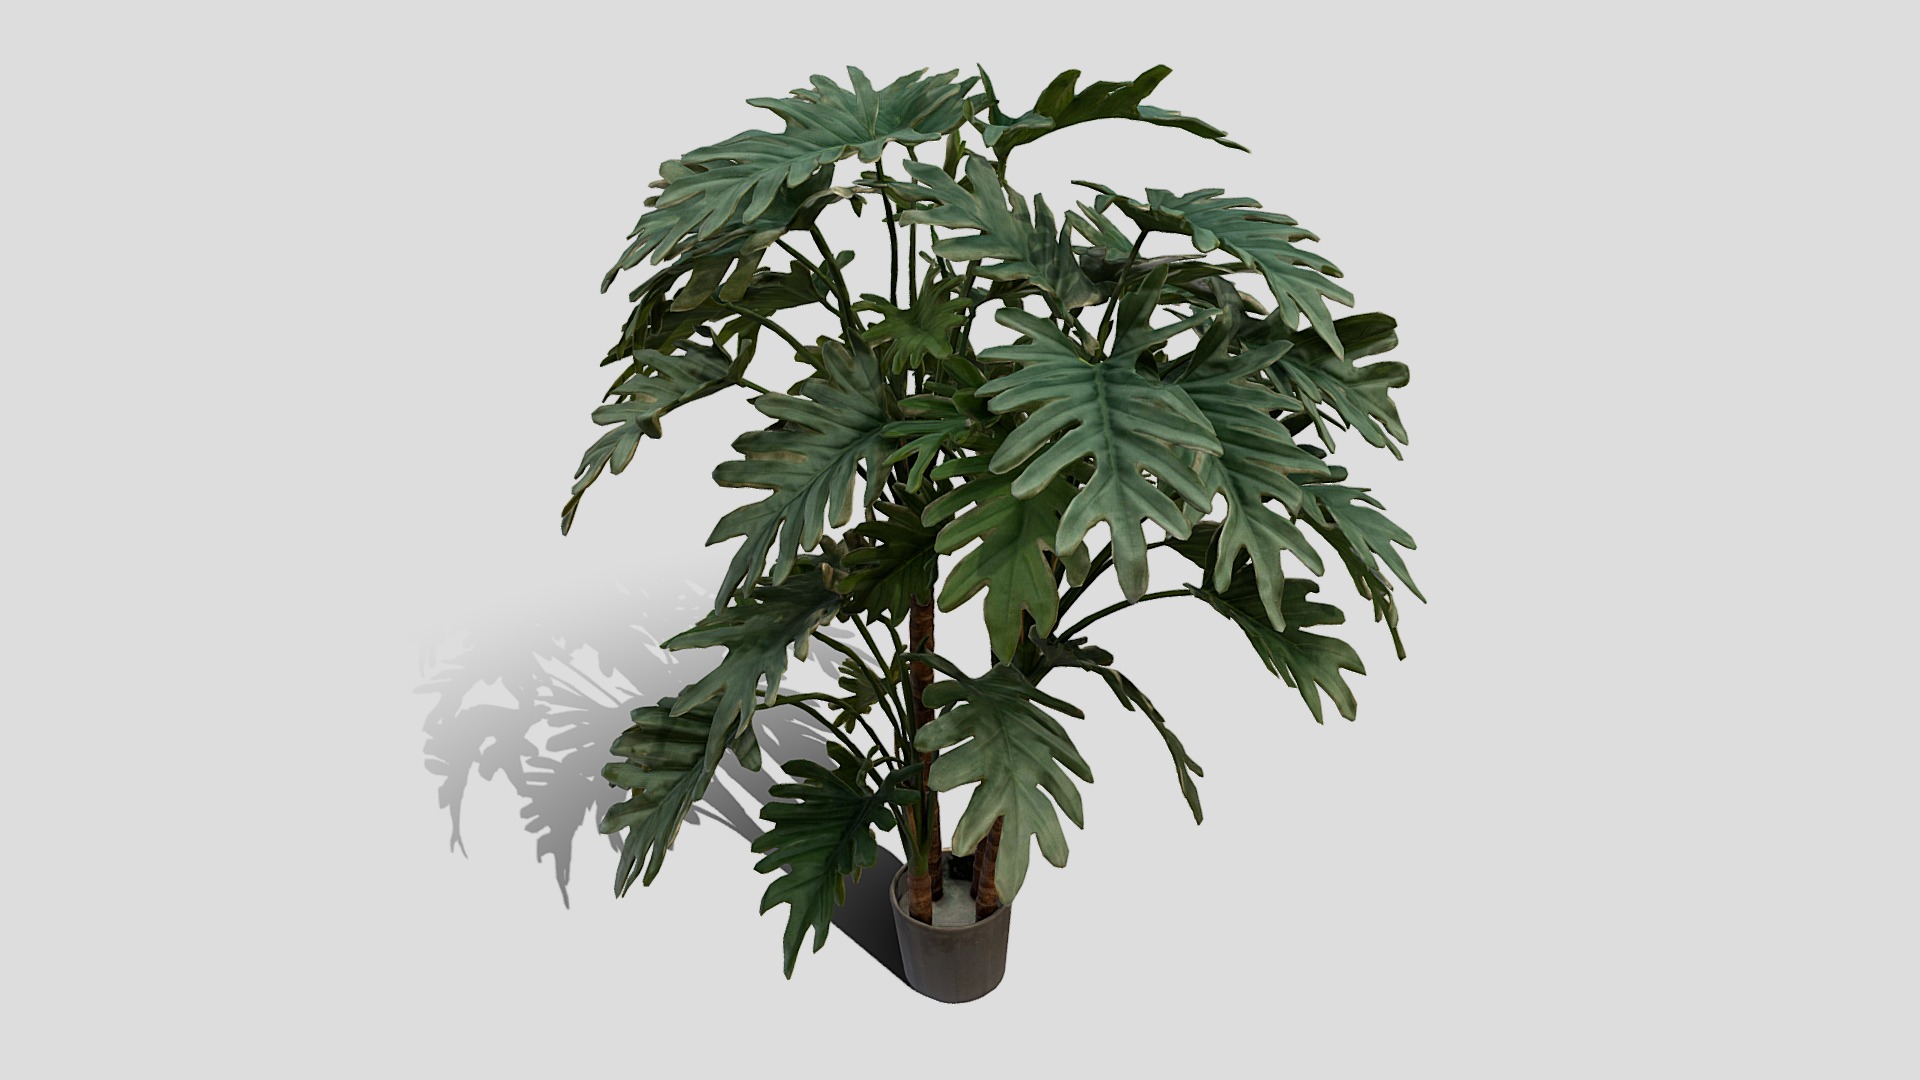 3D model 000042_152509 - This is a 3D model of the 000042_152509. The 3D model is about a potted plant with a plant.